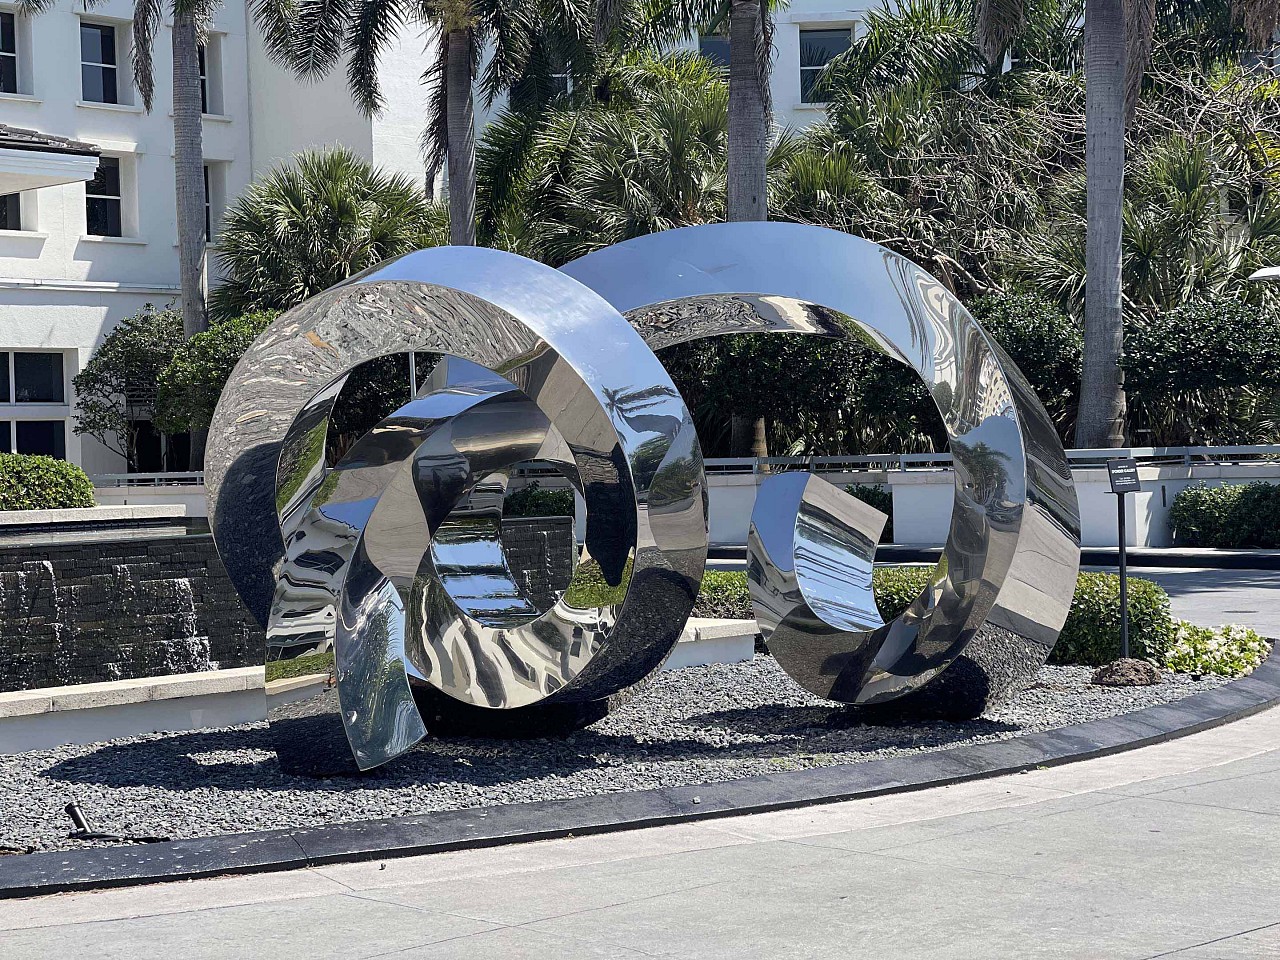 Gino Miles, Passage, 2022
stainless steel, 96 x 120 x 156 in.
MILE00043